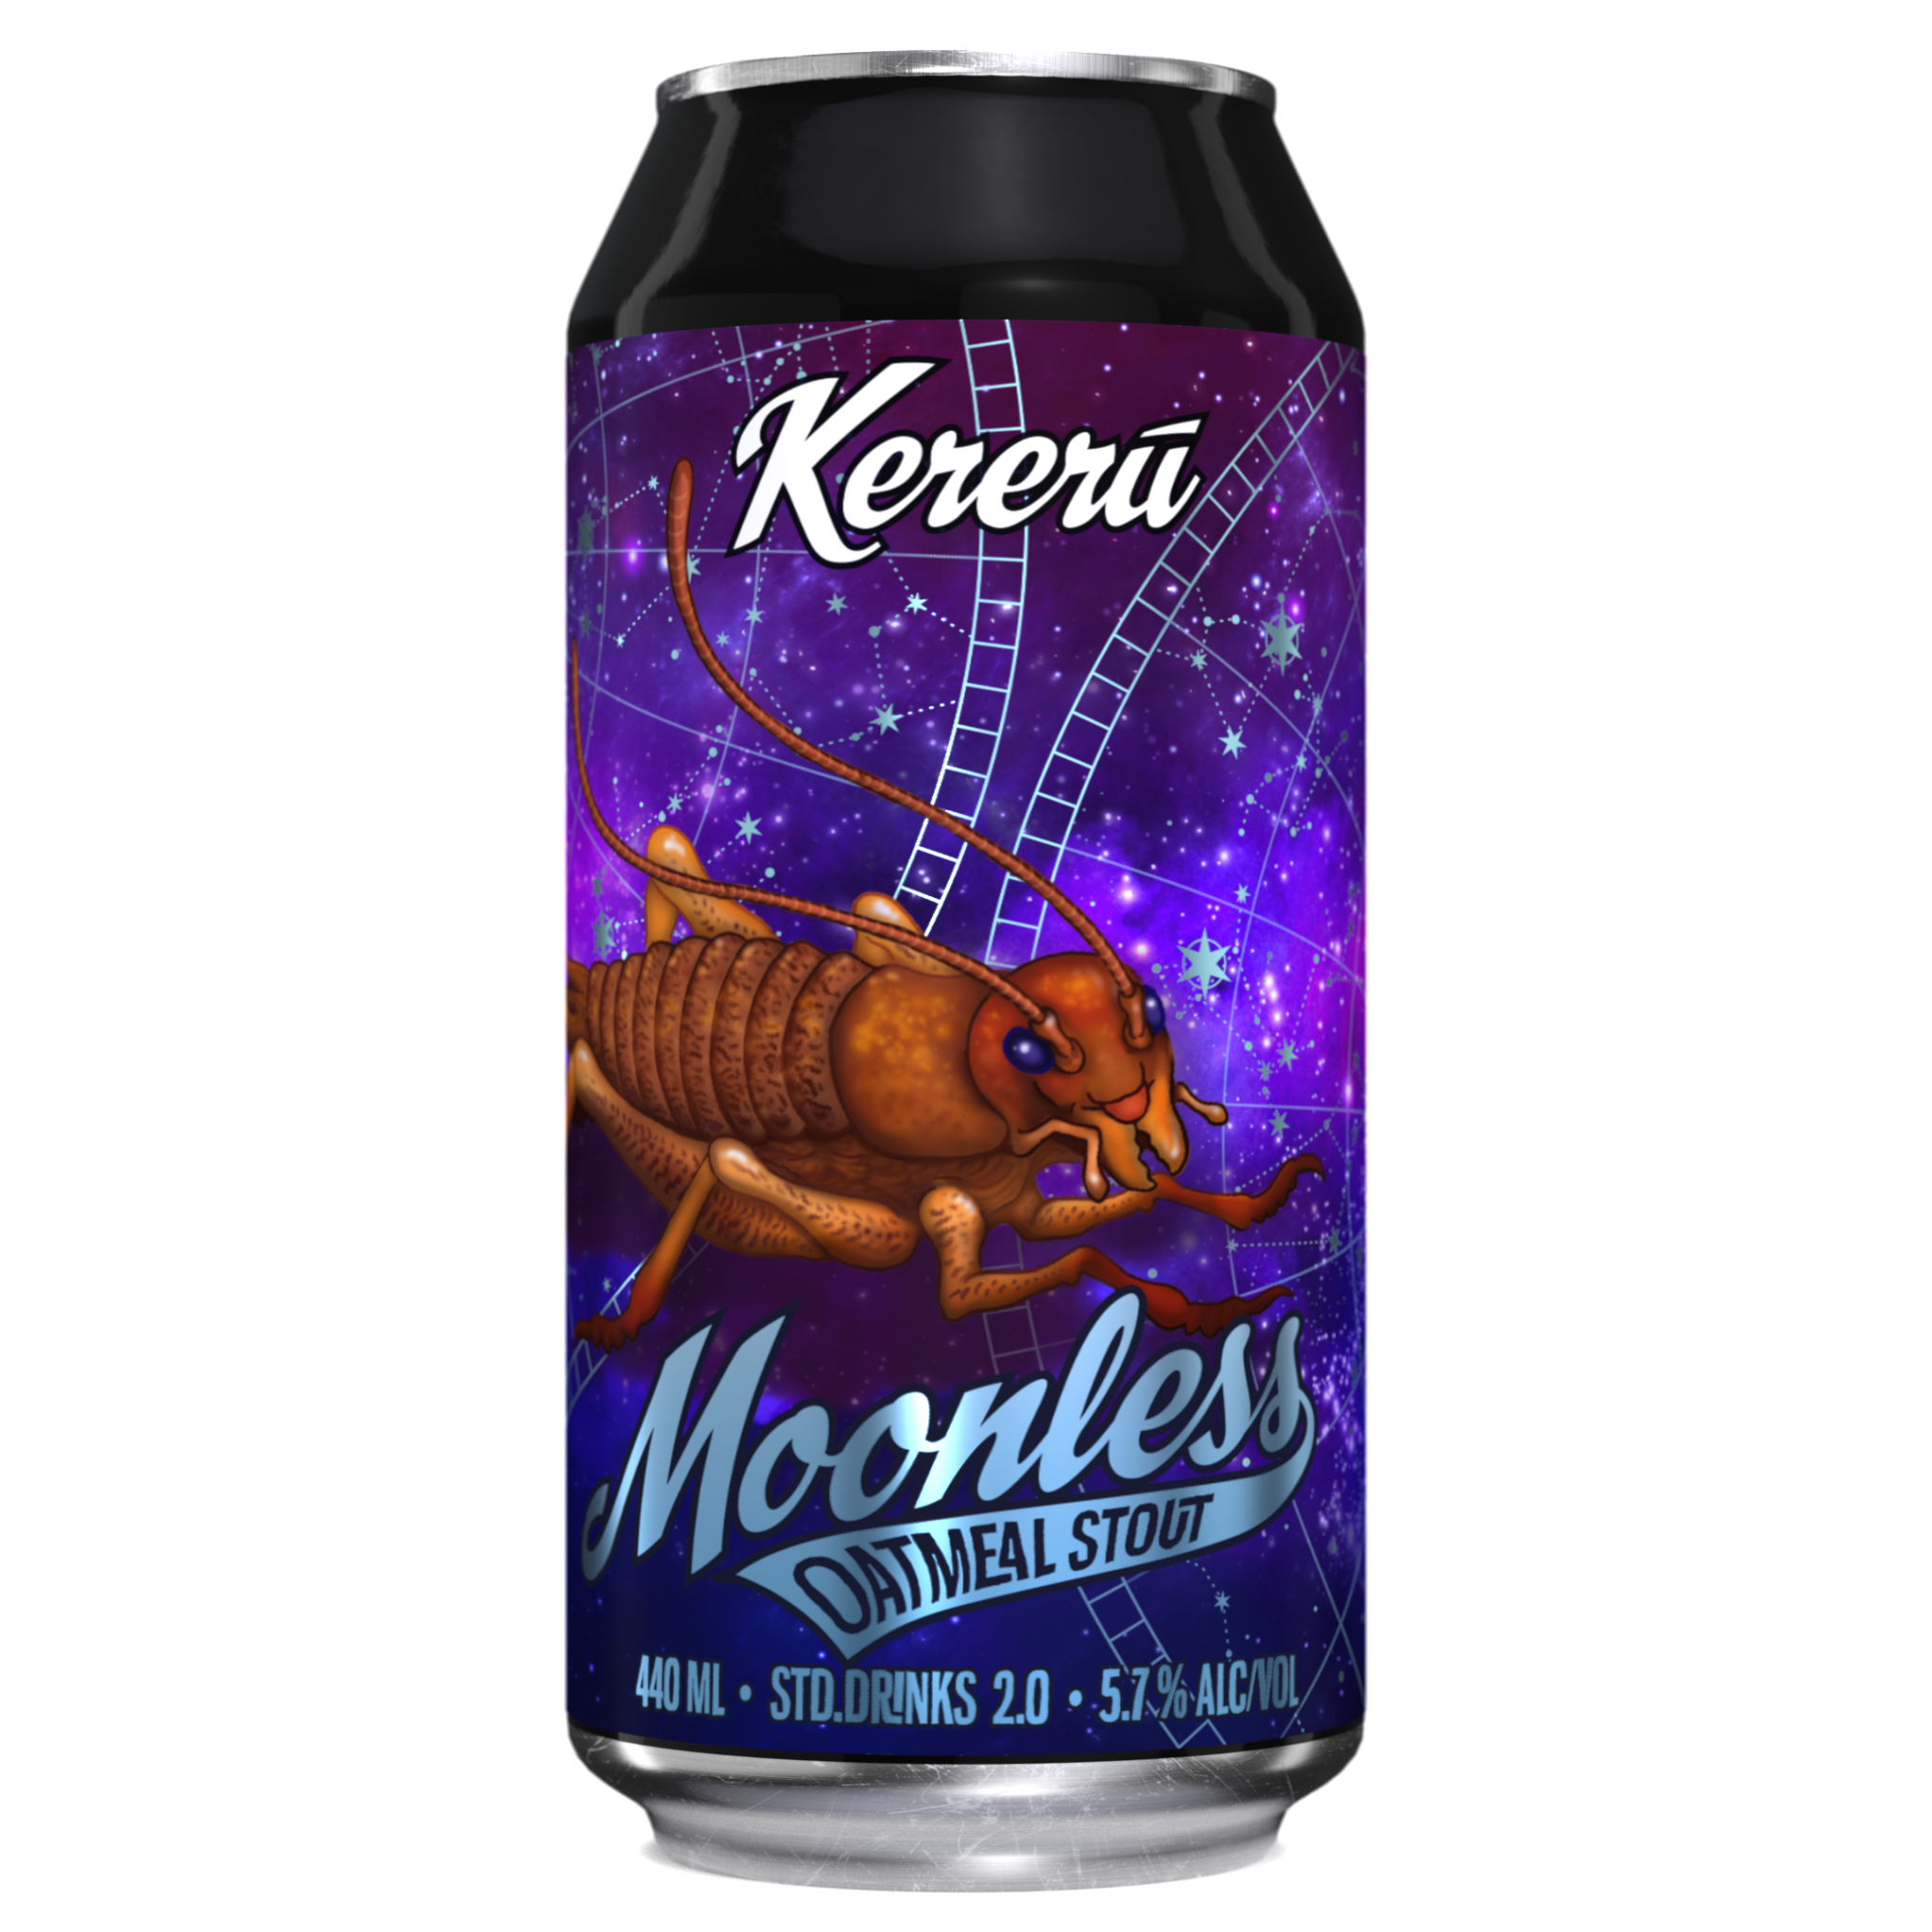 Featured Beer: Moonless Oatmeal Stout